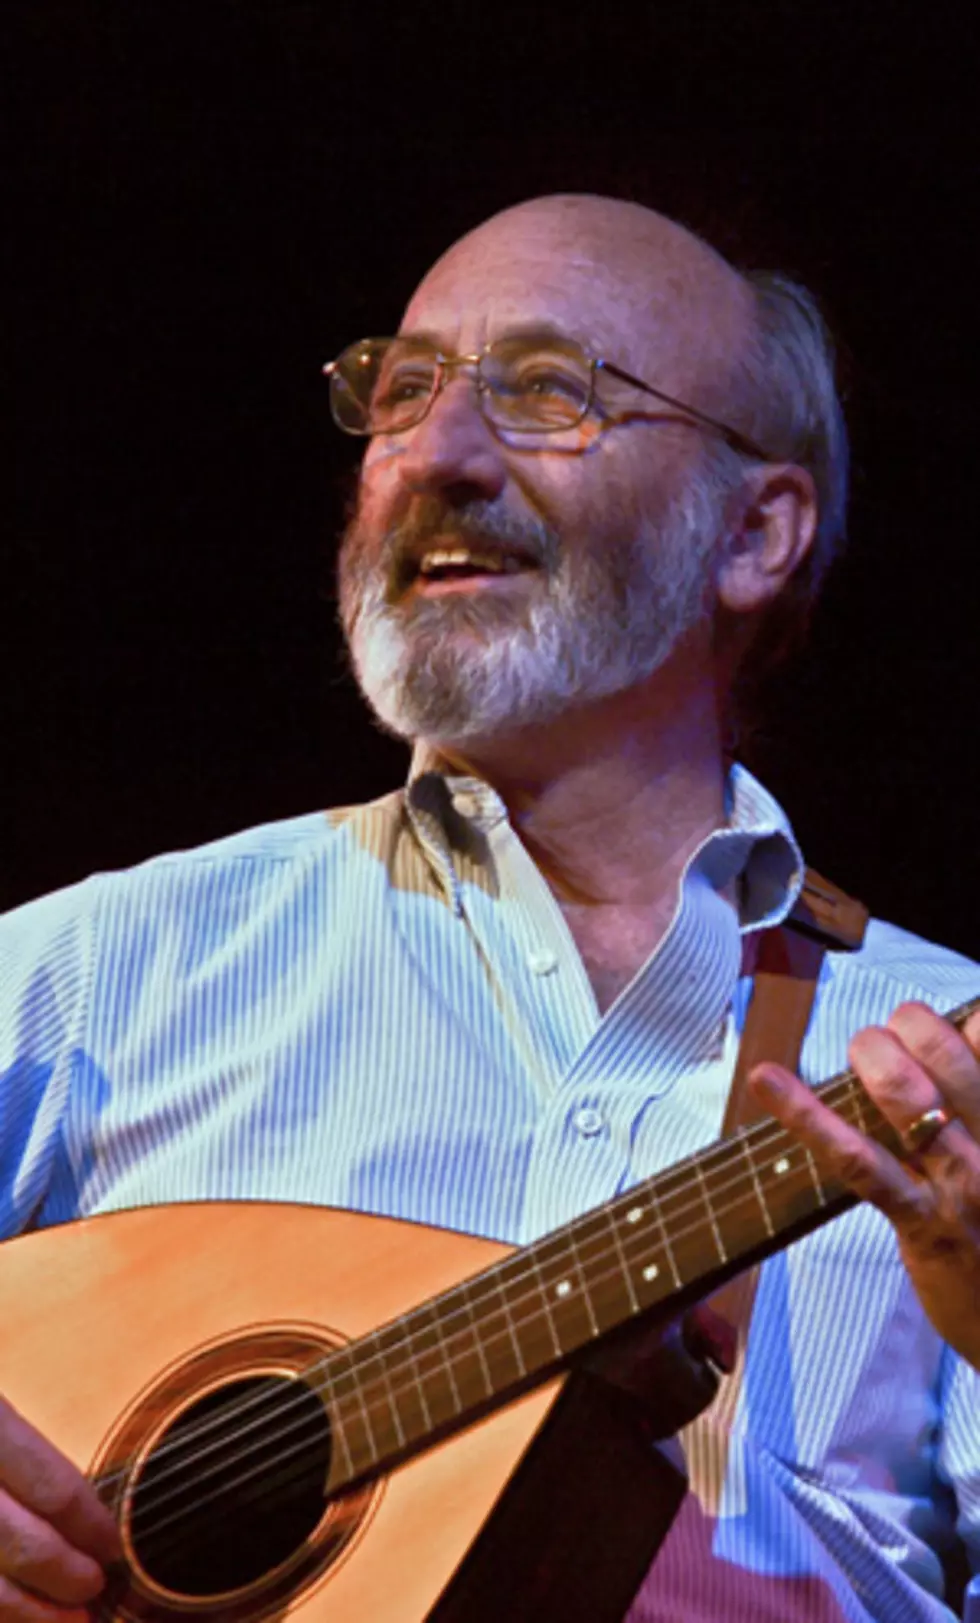 Legendary Noel Paul Stookey To Perform At The Grand [VIDEO]